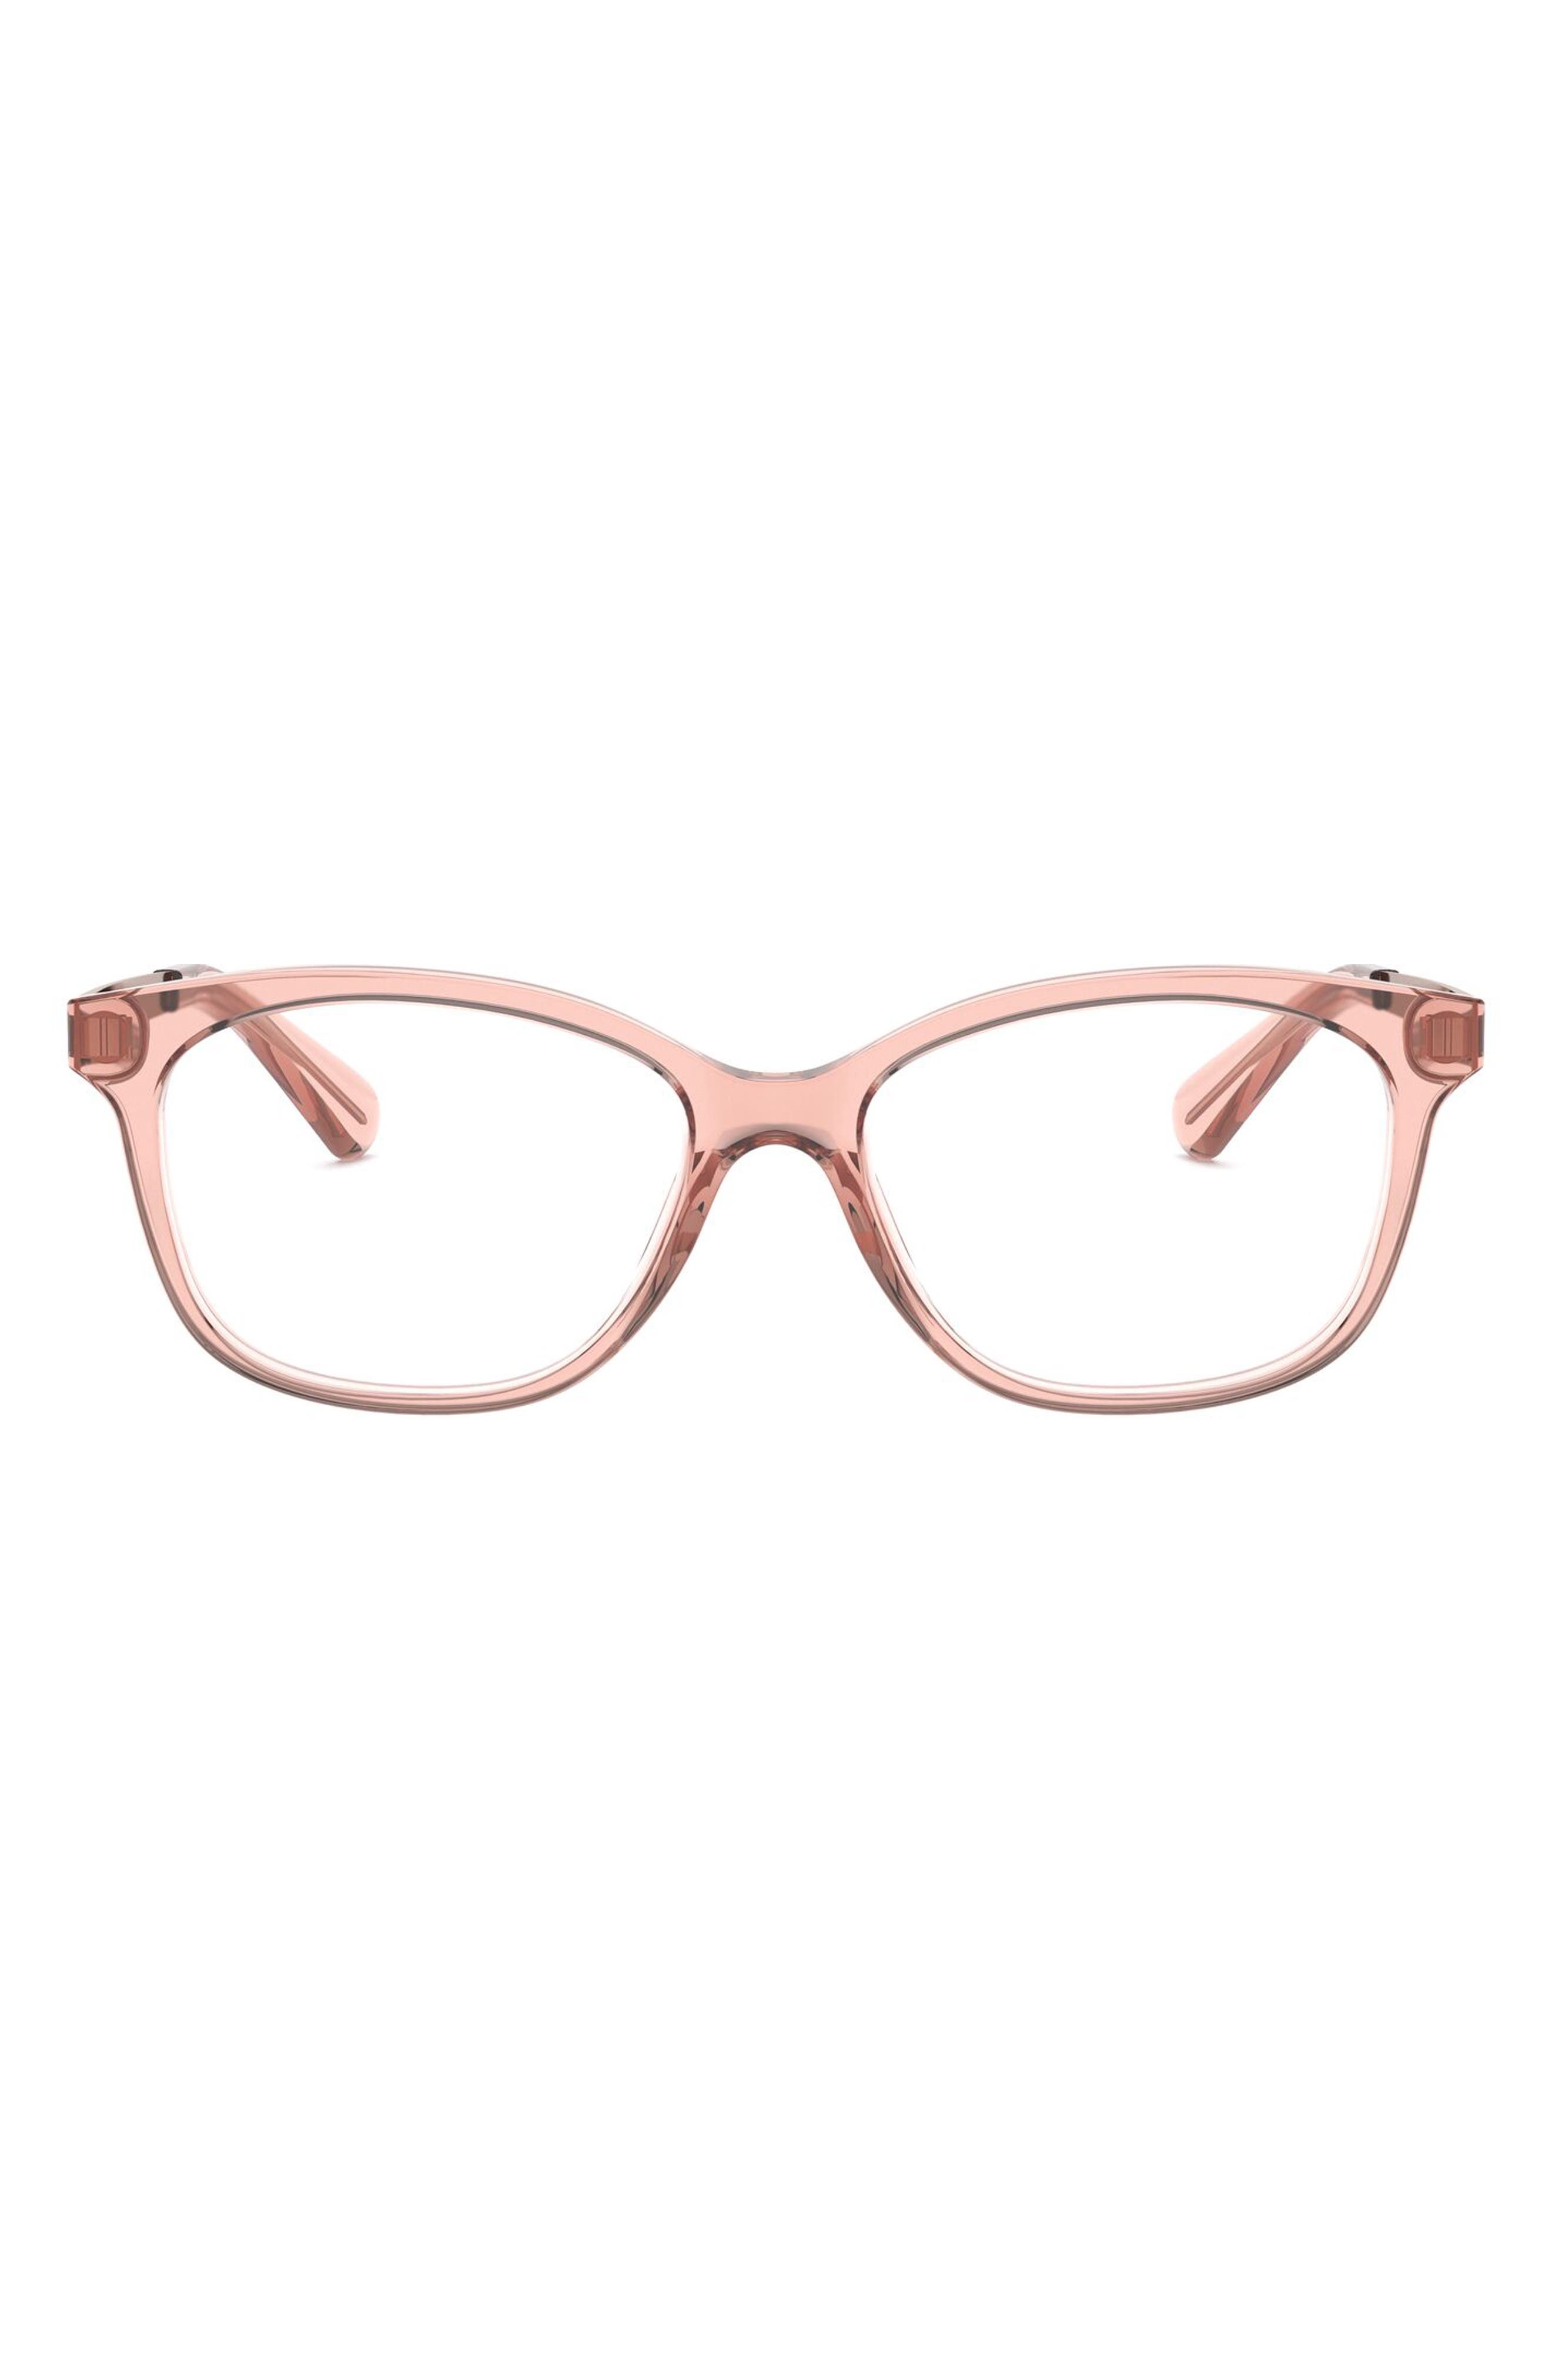 Michael Kors 53mm Square Optical Glasses in Transparent Red at Nordstrom